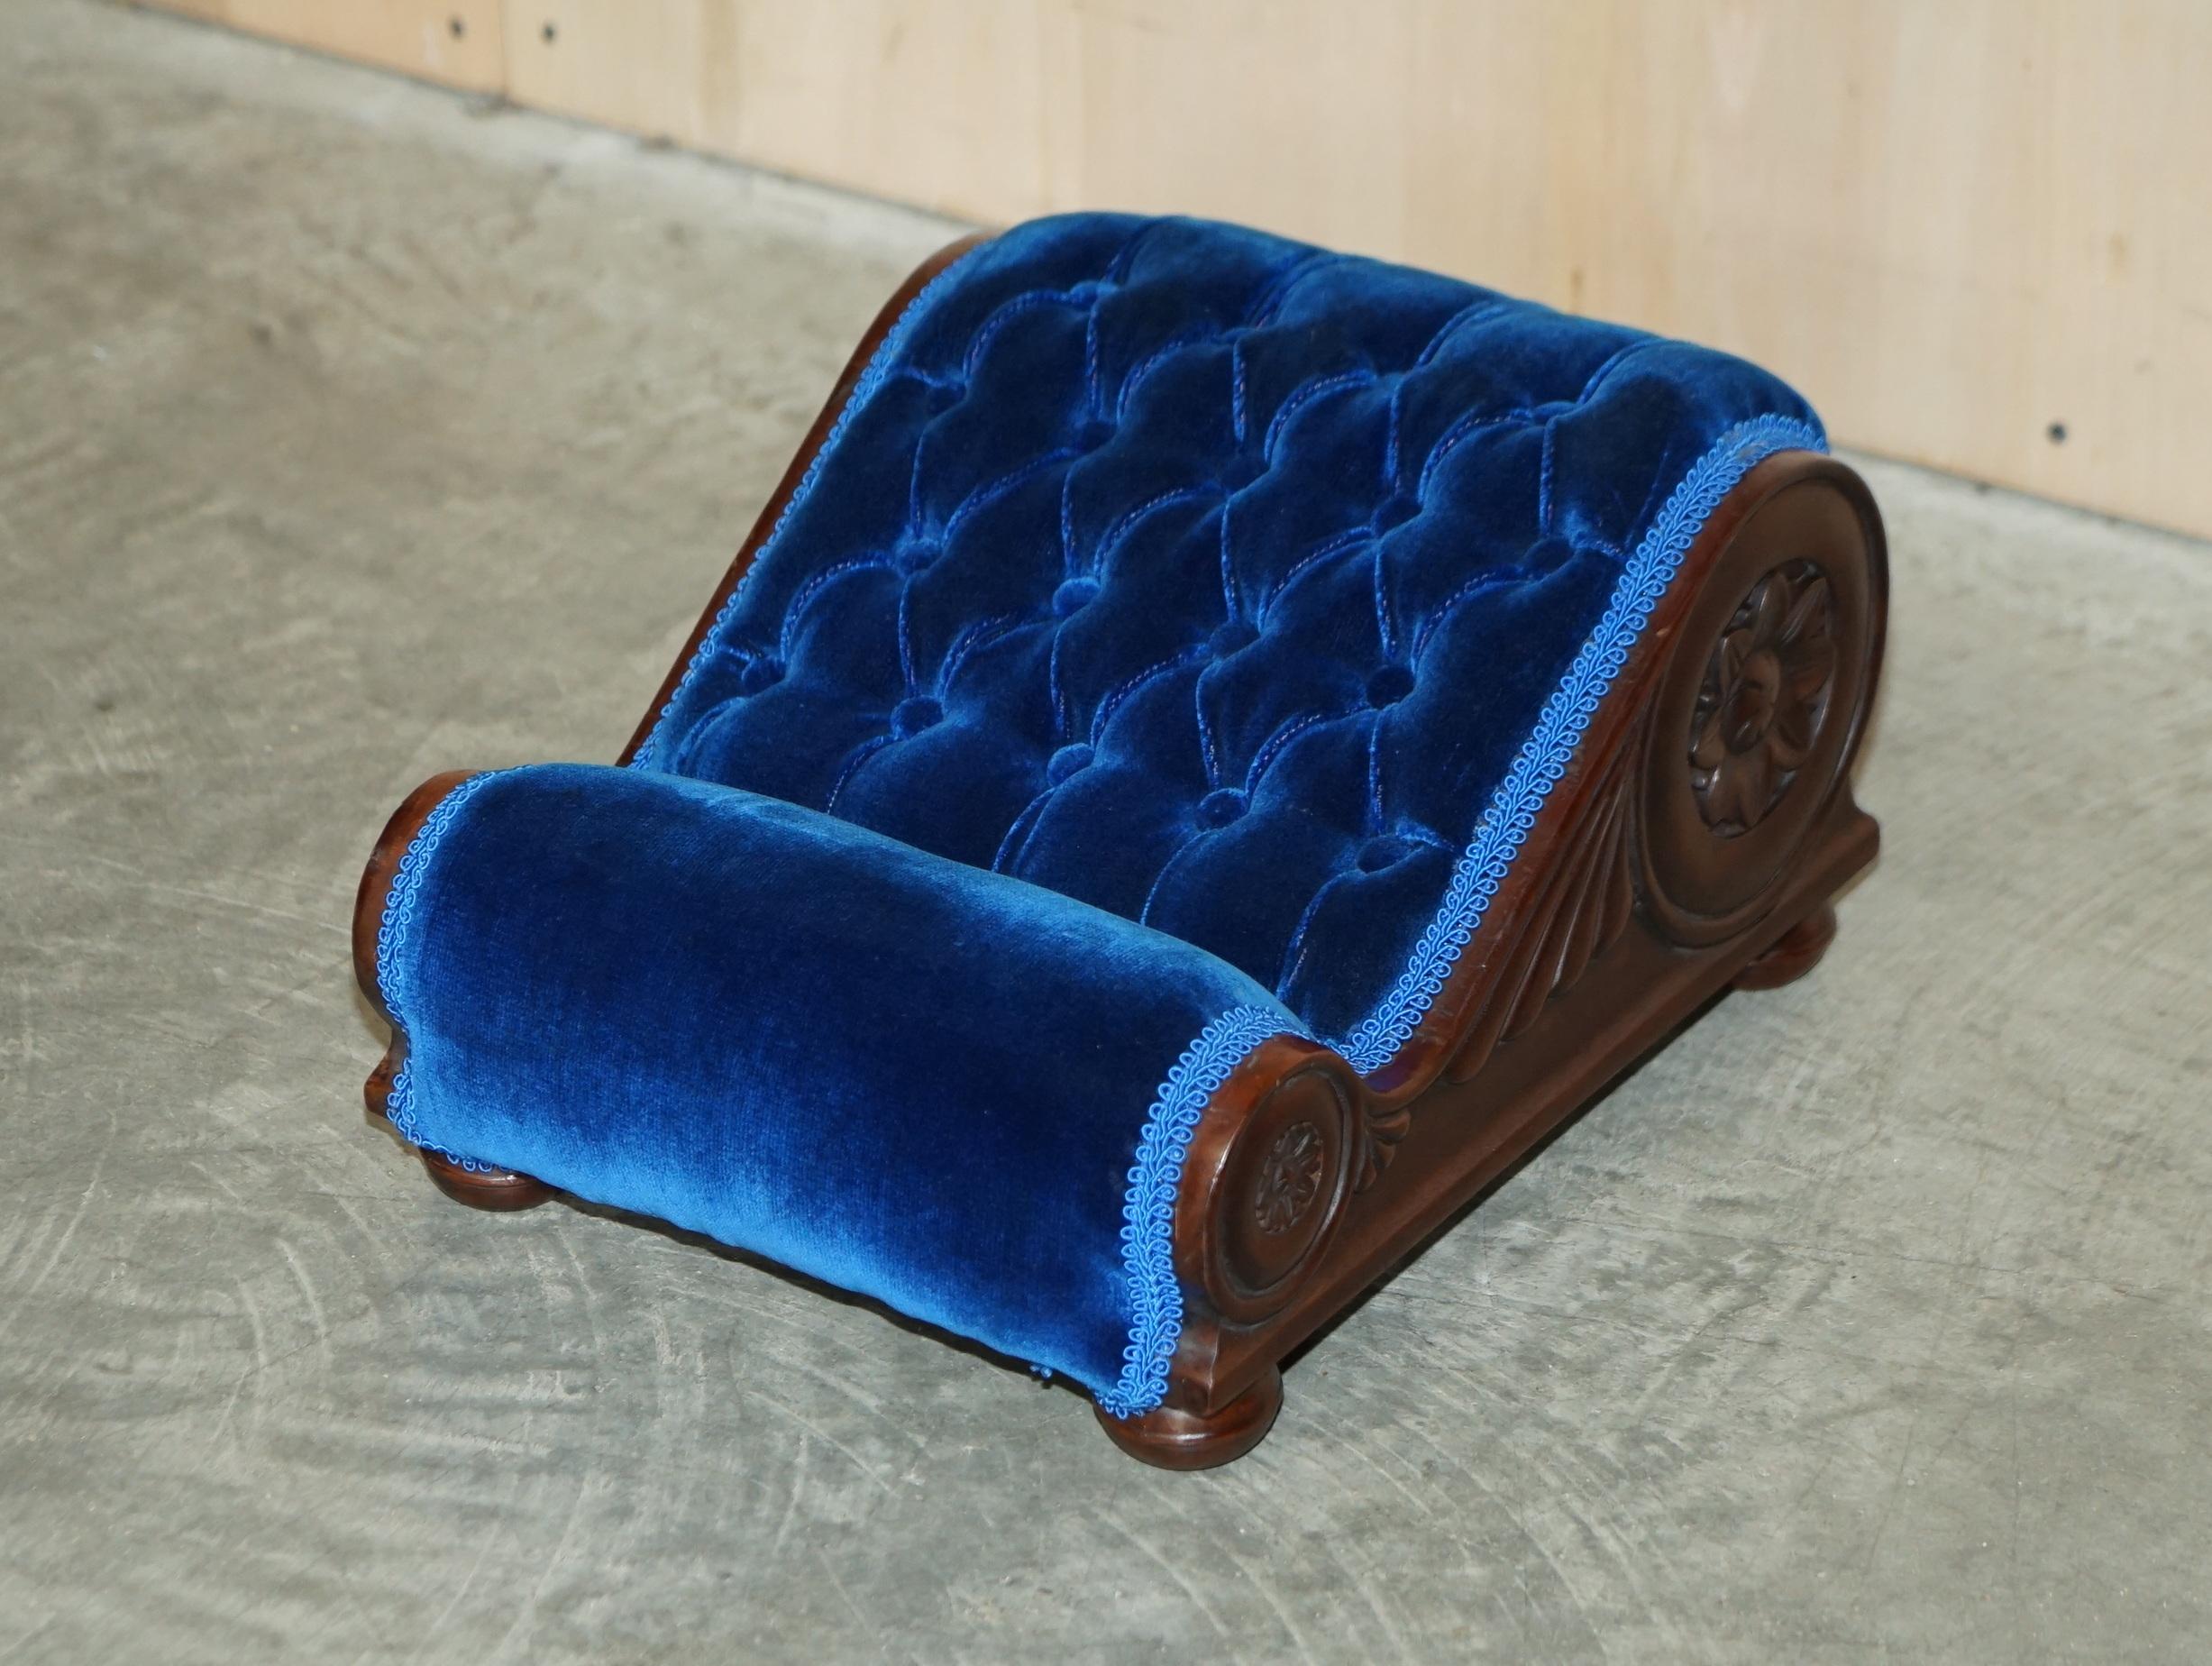 English PAIR OF REGENCY BLUE ANTIQUE ViCTORIAN CHESTERFIELD TUFTED CURVED FOOTSTOOLS